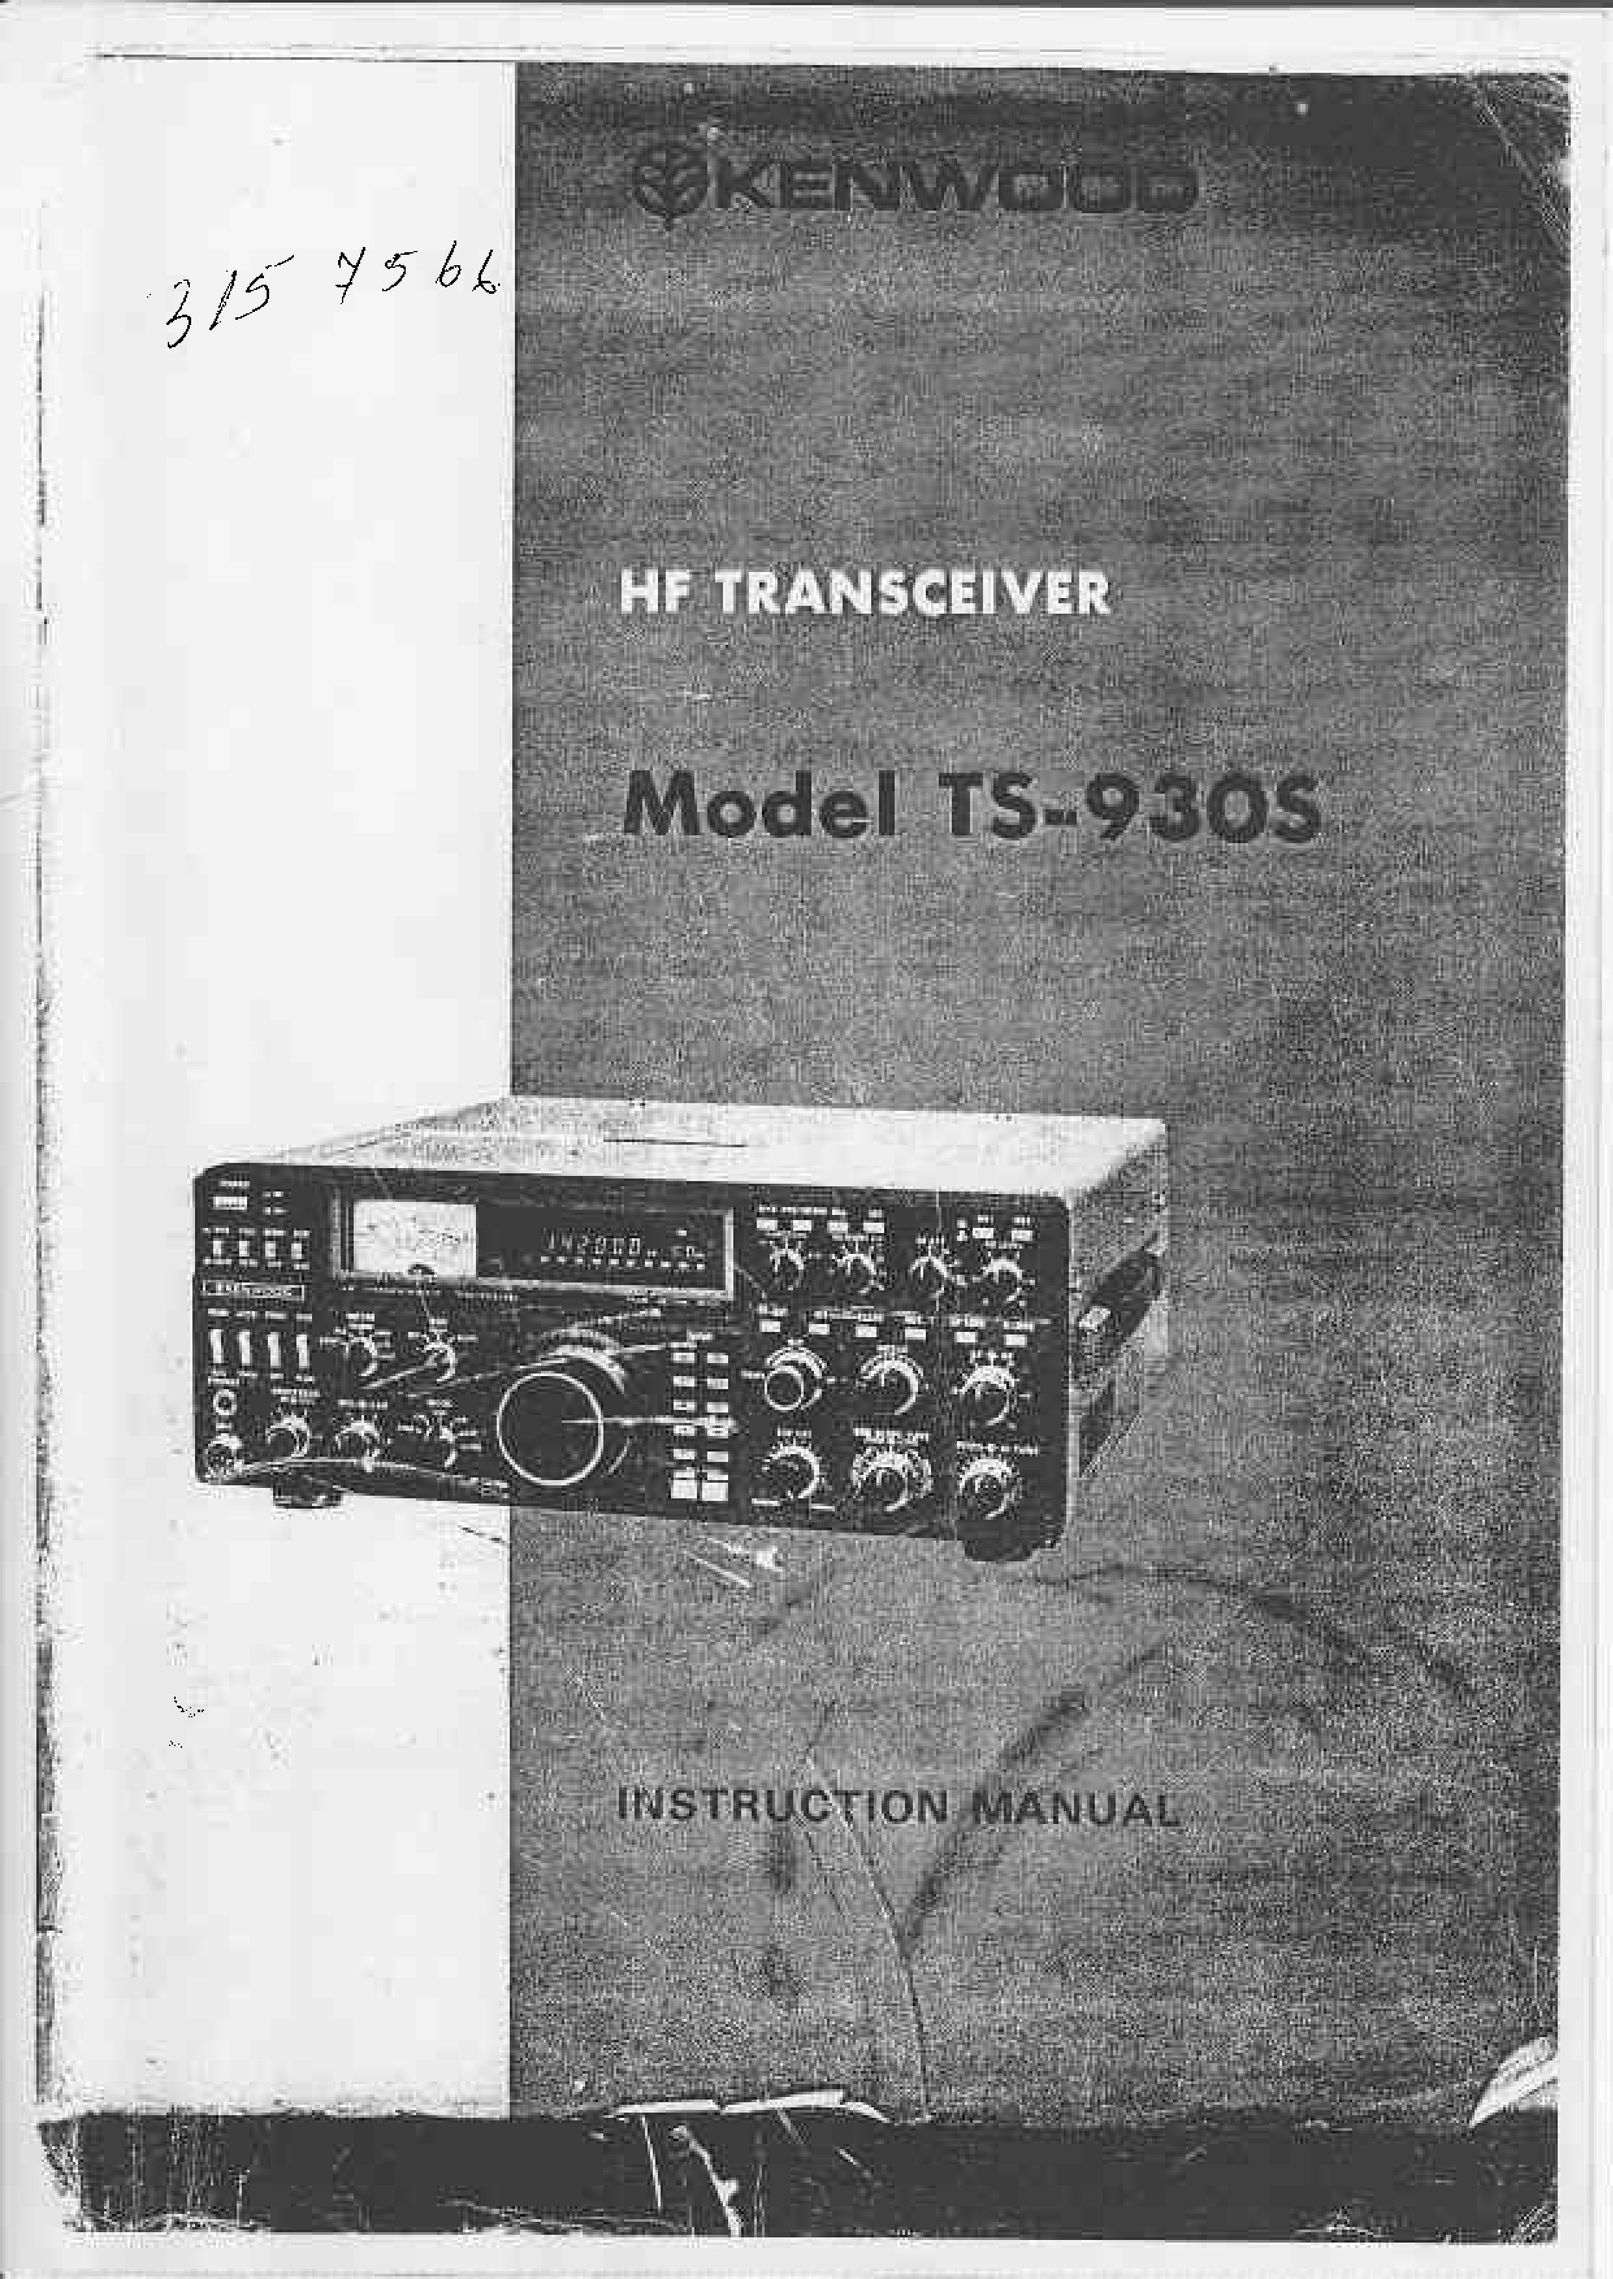 Kenwood TS-930S Microcassette Recorder User Manual